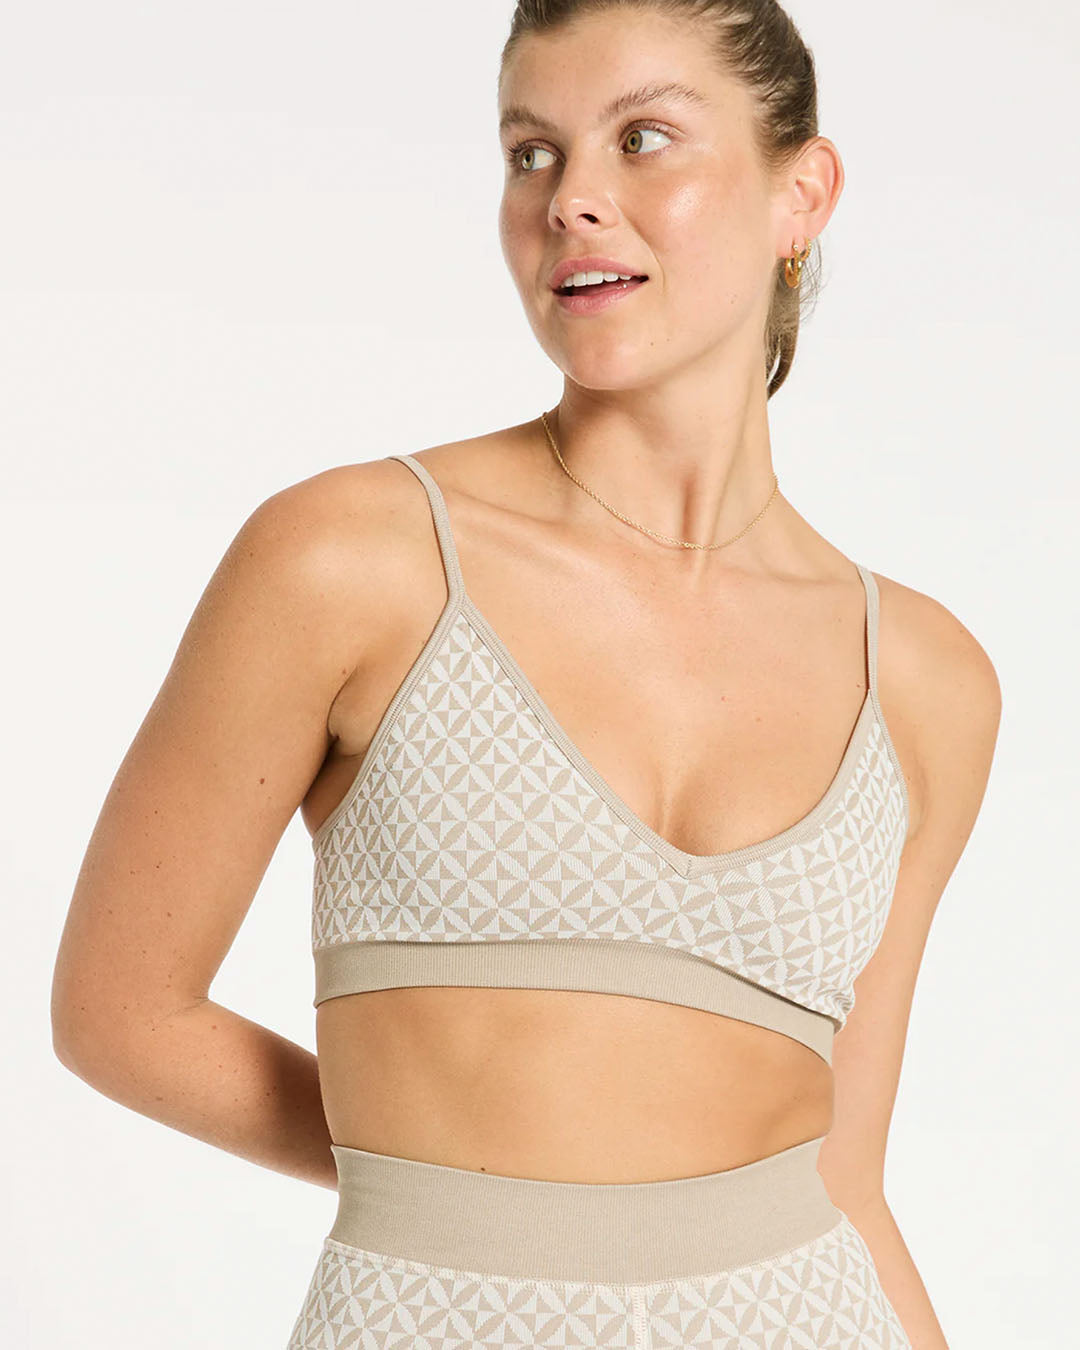 Mindful Knit Bralette - Oatmeal Activewear by Nimble - Prae Store